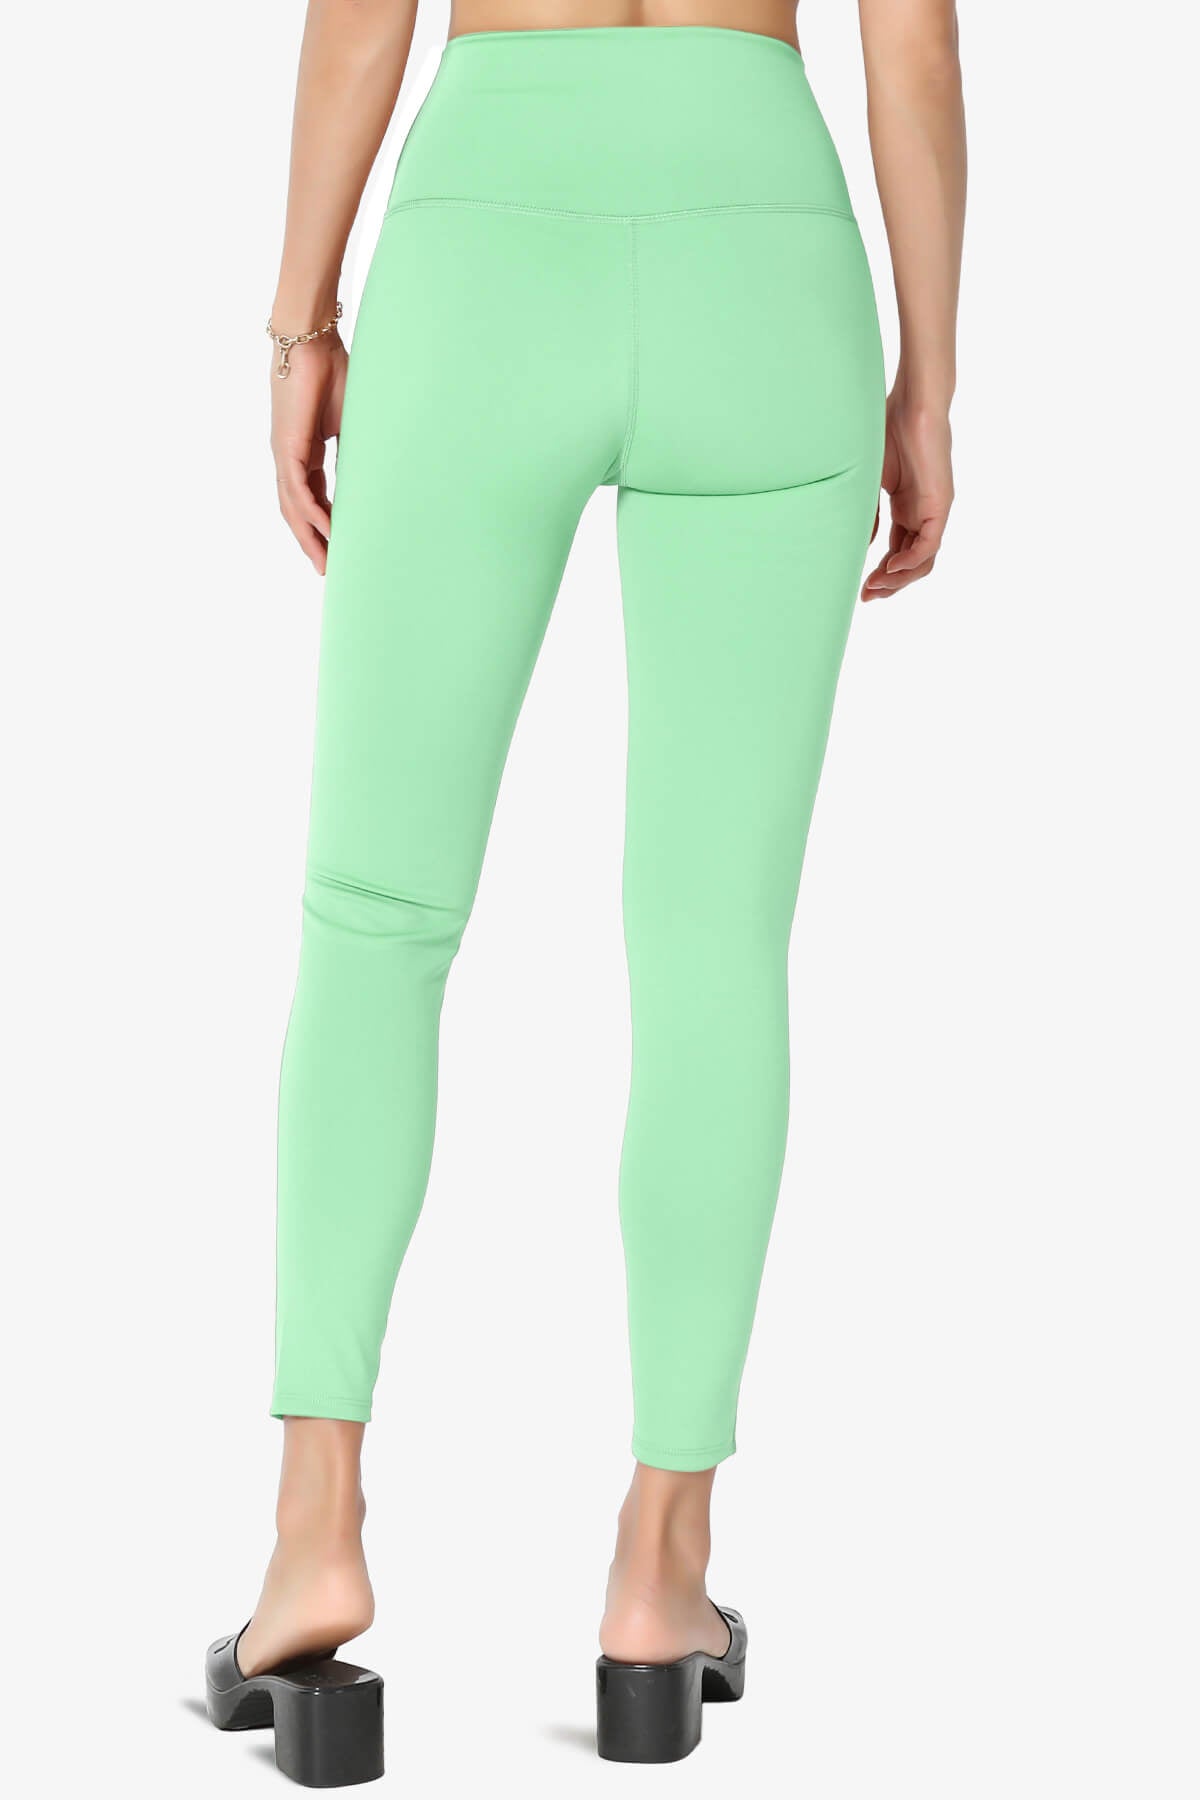 Mosco Athletic Tummy Control Workout Leggings GREEN MINT_4